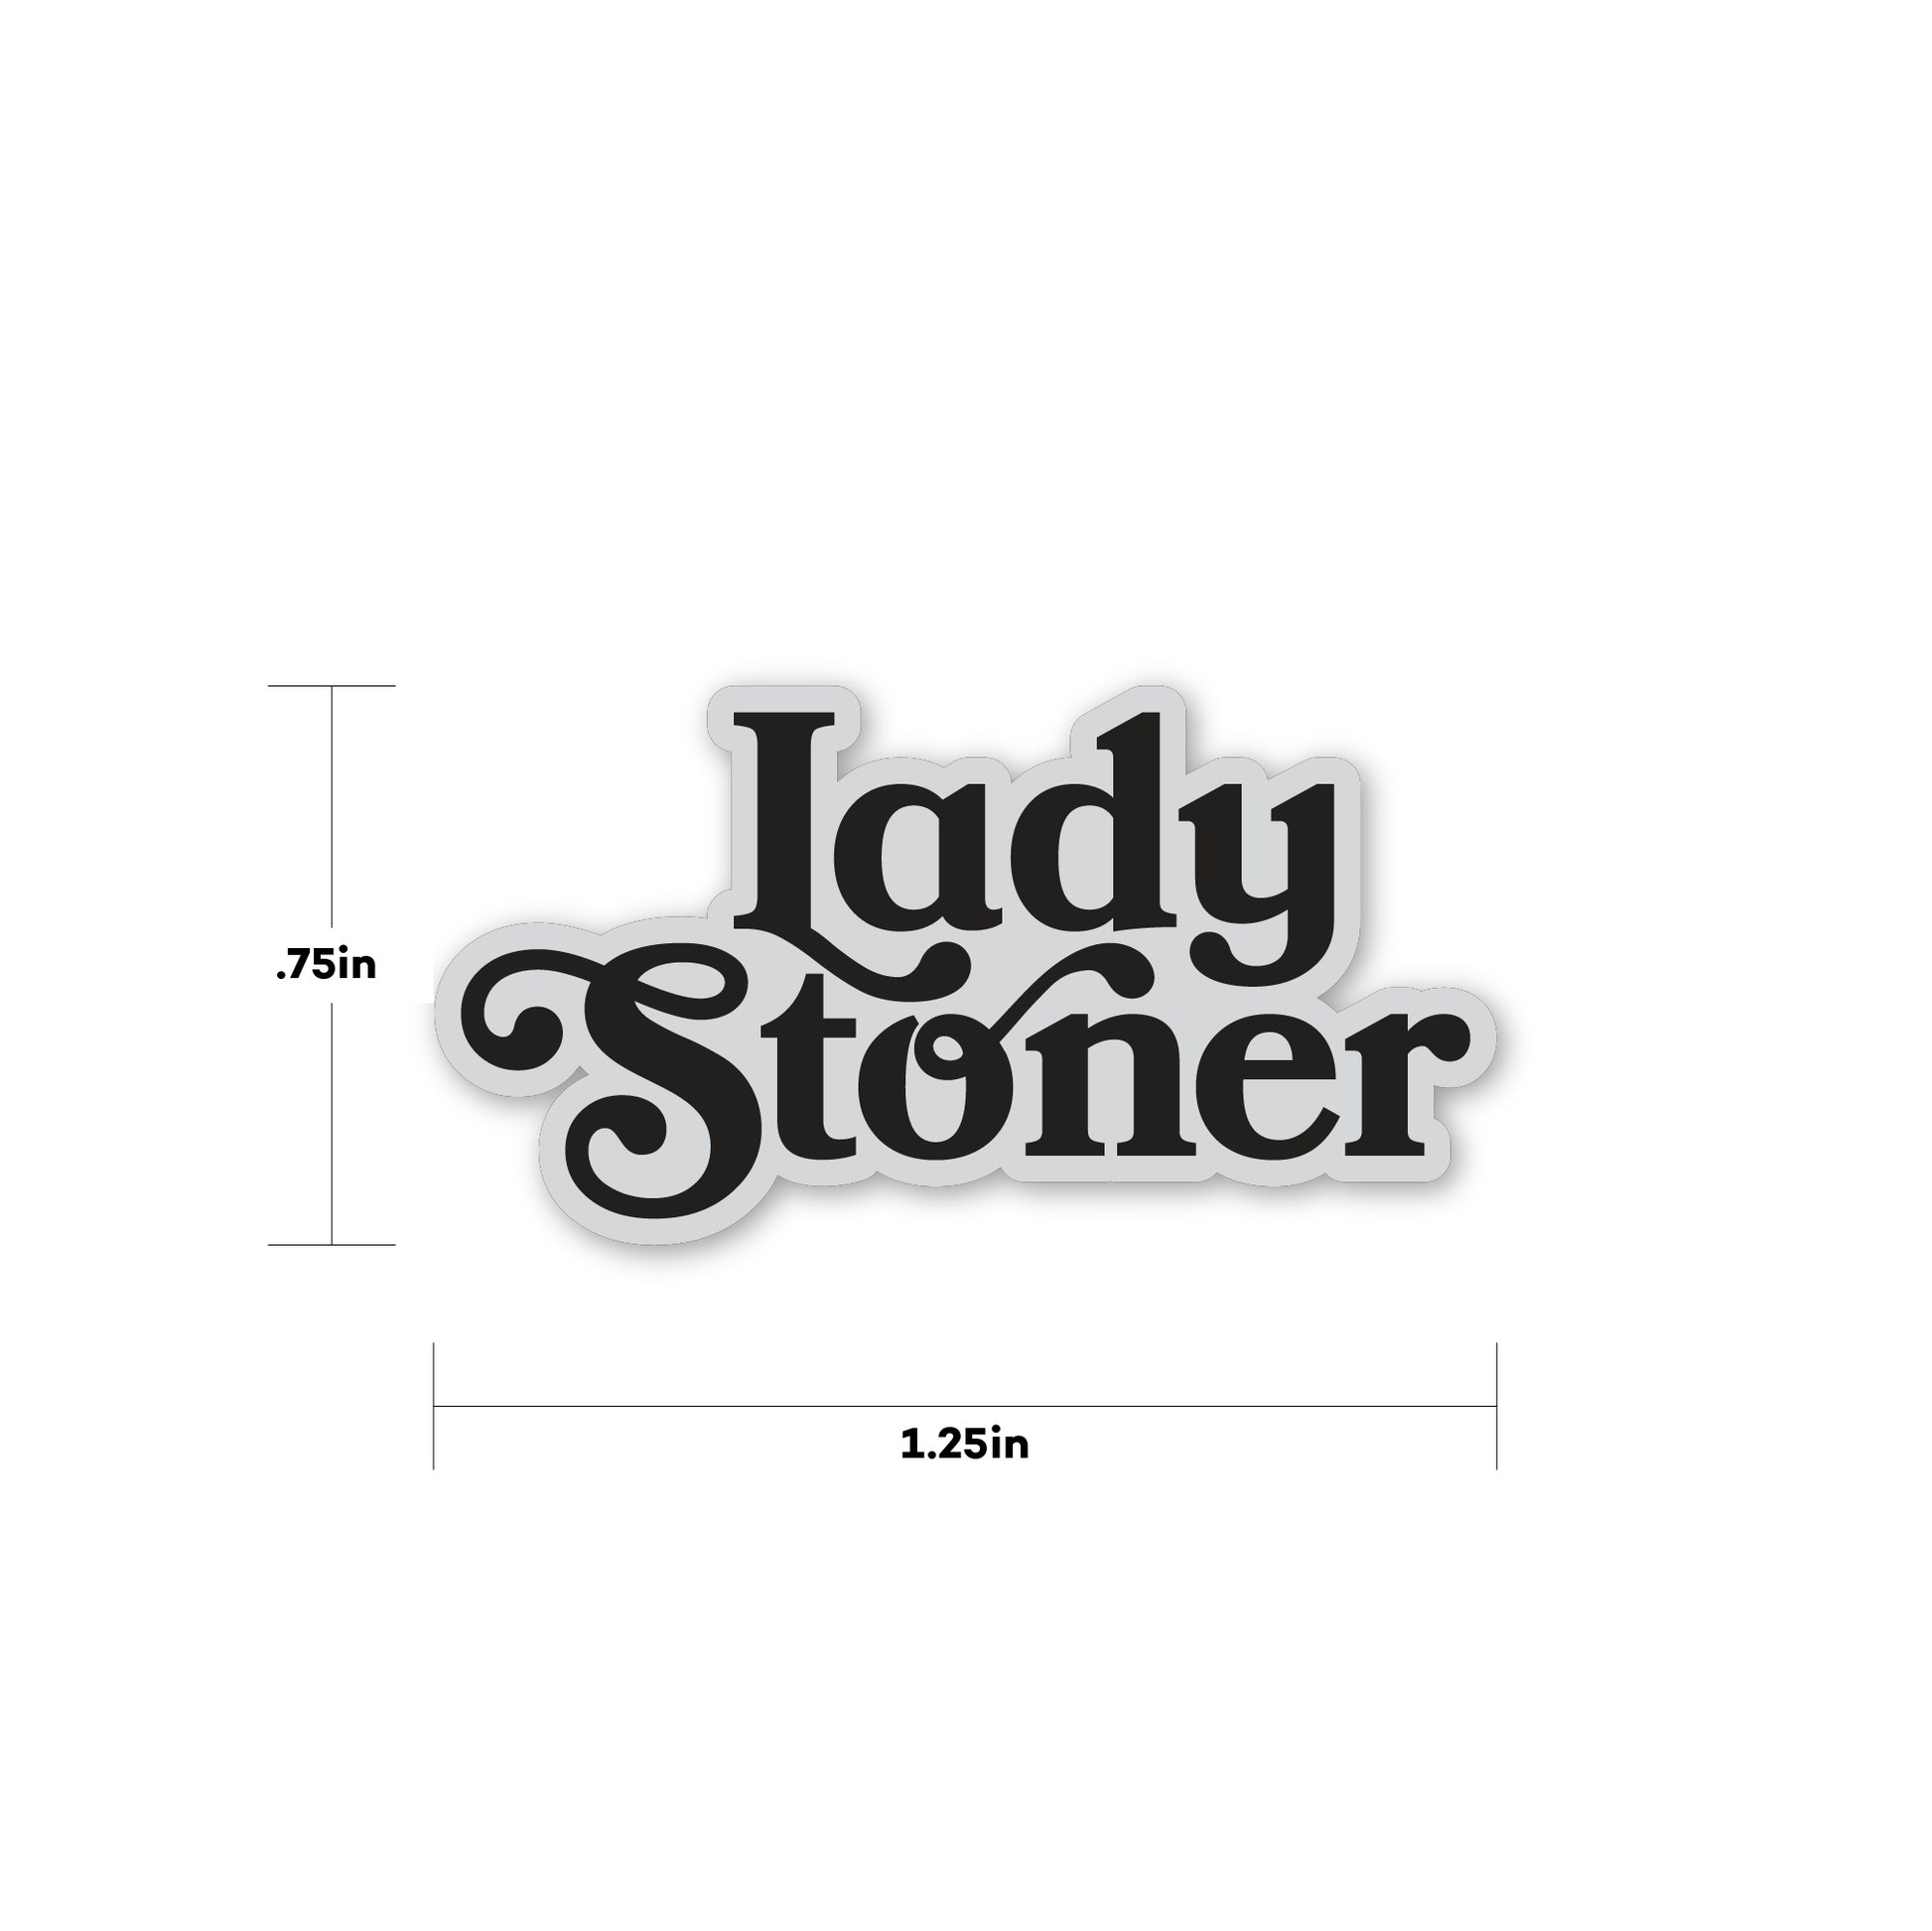 .75 in  by 1.25 in silver lady stoner enamel pin by fntsma